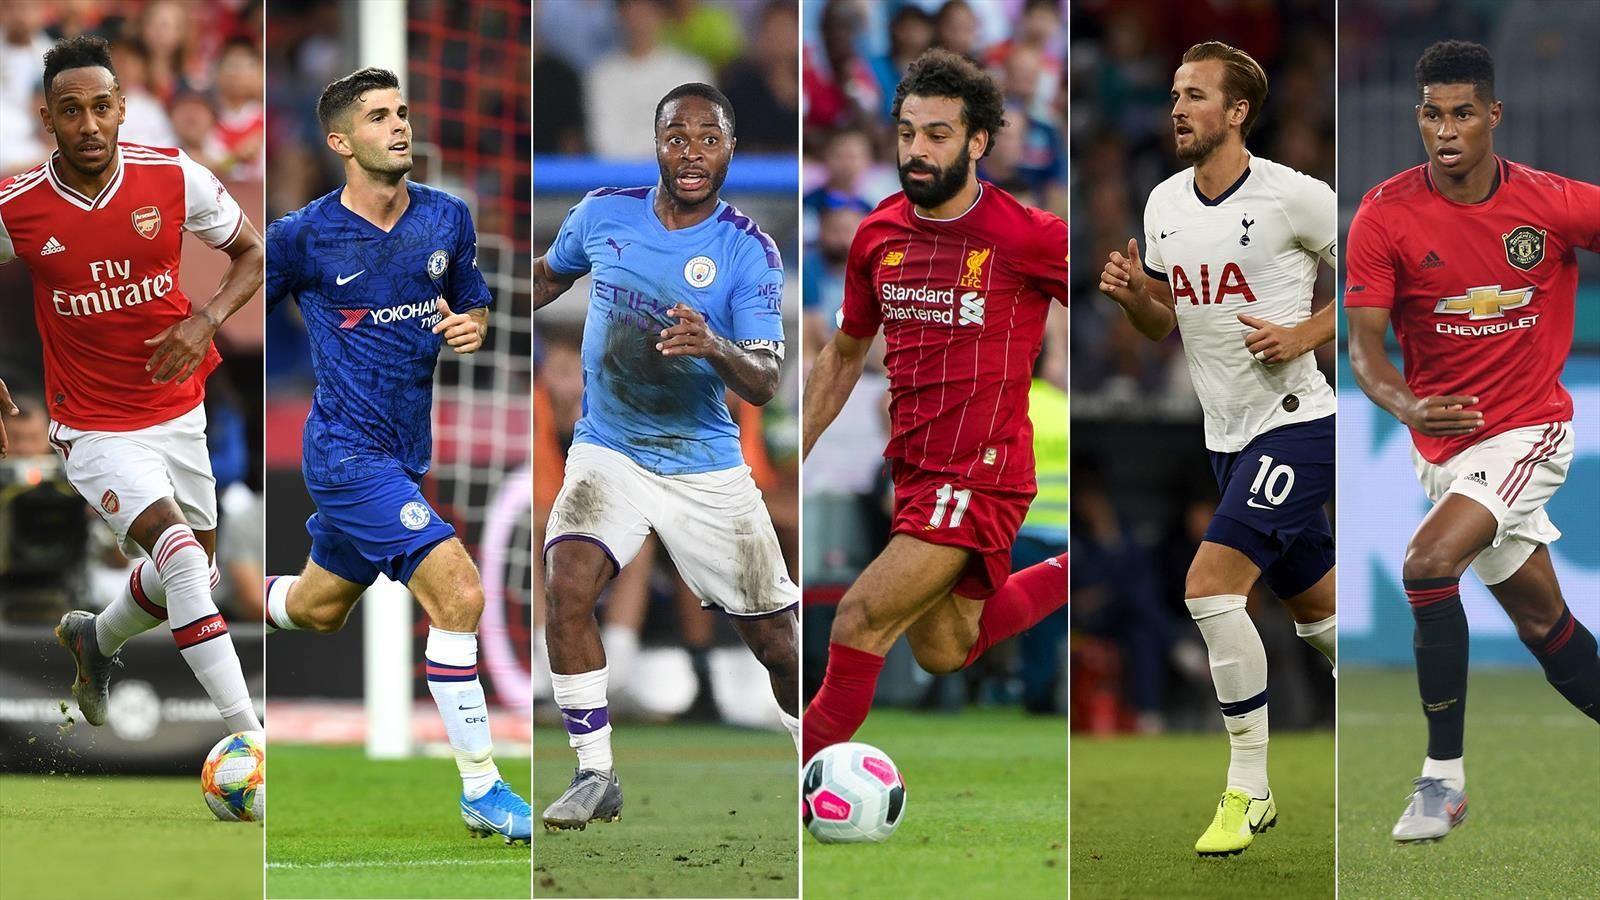 Premier League 2019 20 Season Preview: Club By Club Guide, Summer Signings, Hopes And Fears